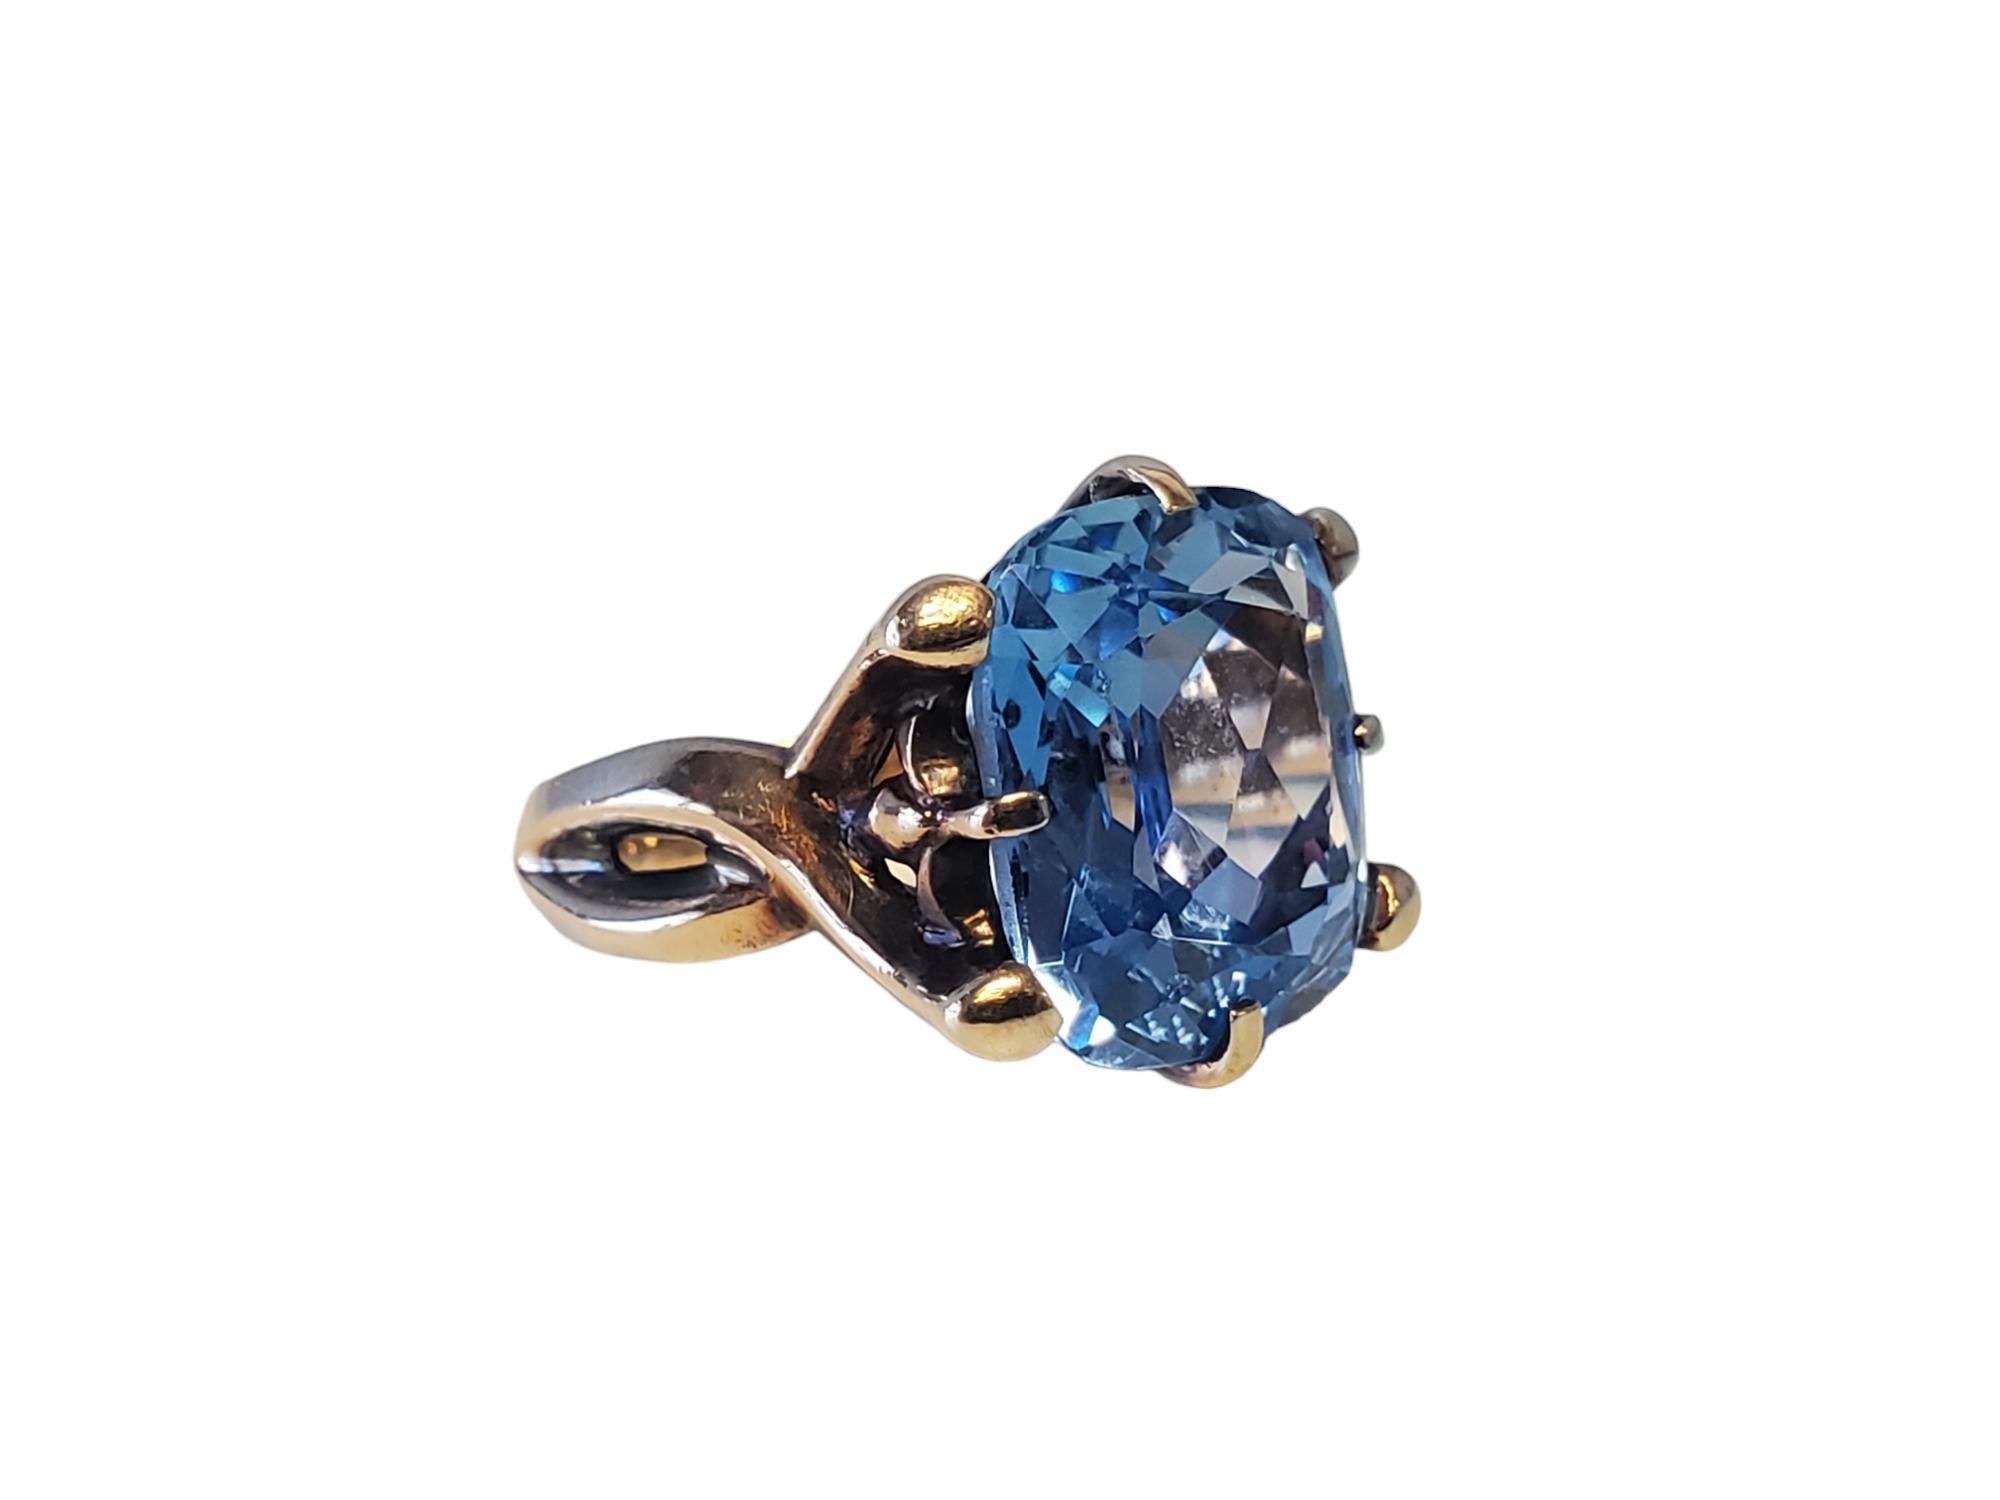 Vintage 10k Yellow Gold Ring with Antique Cushion Blue Gem Center

Listed is a vintage blue cushion gemstone. The center stone is likely synthetic but still beautiful oceany blue color. The ring is in good condition for its age and the stone has